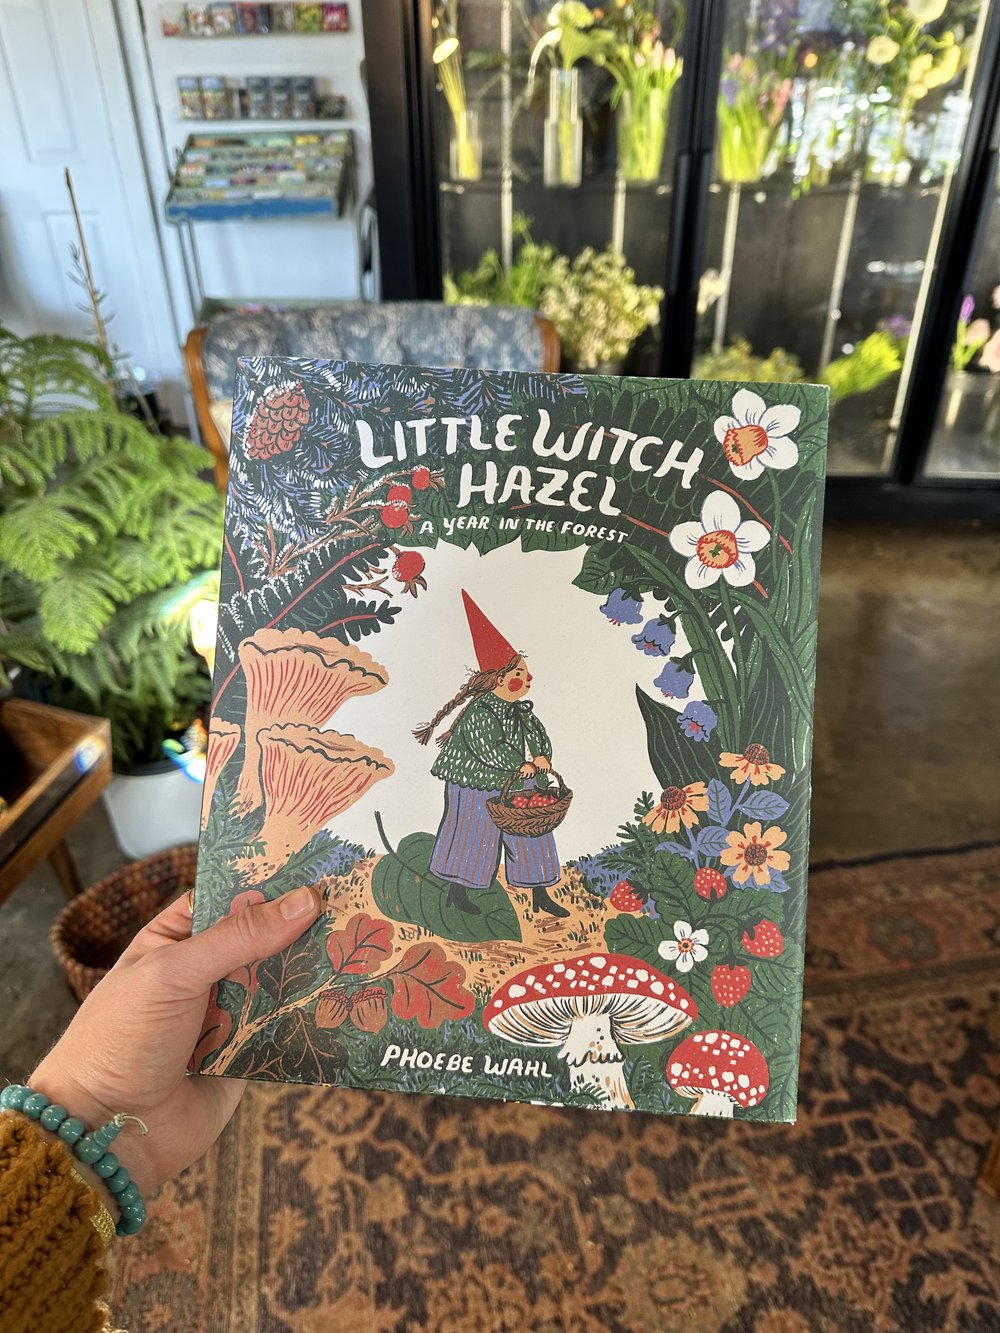 little witch hazel: a year in the forest book from flower + furbish Shop now at flower + furbish